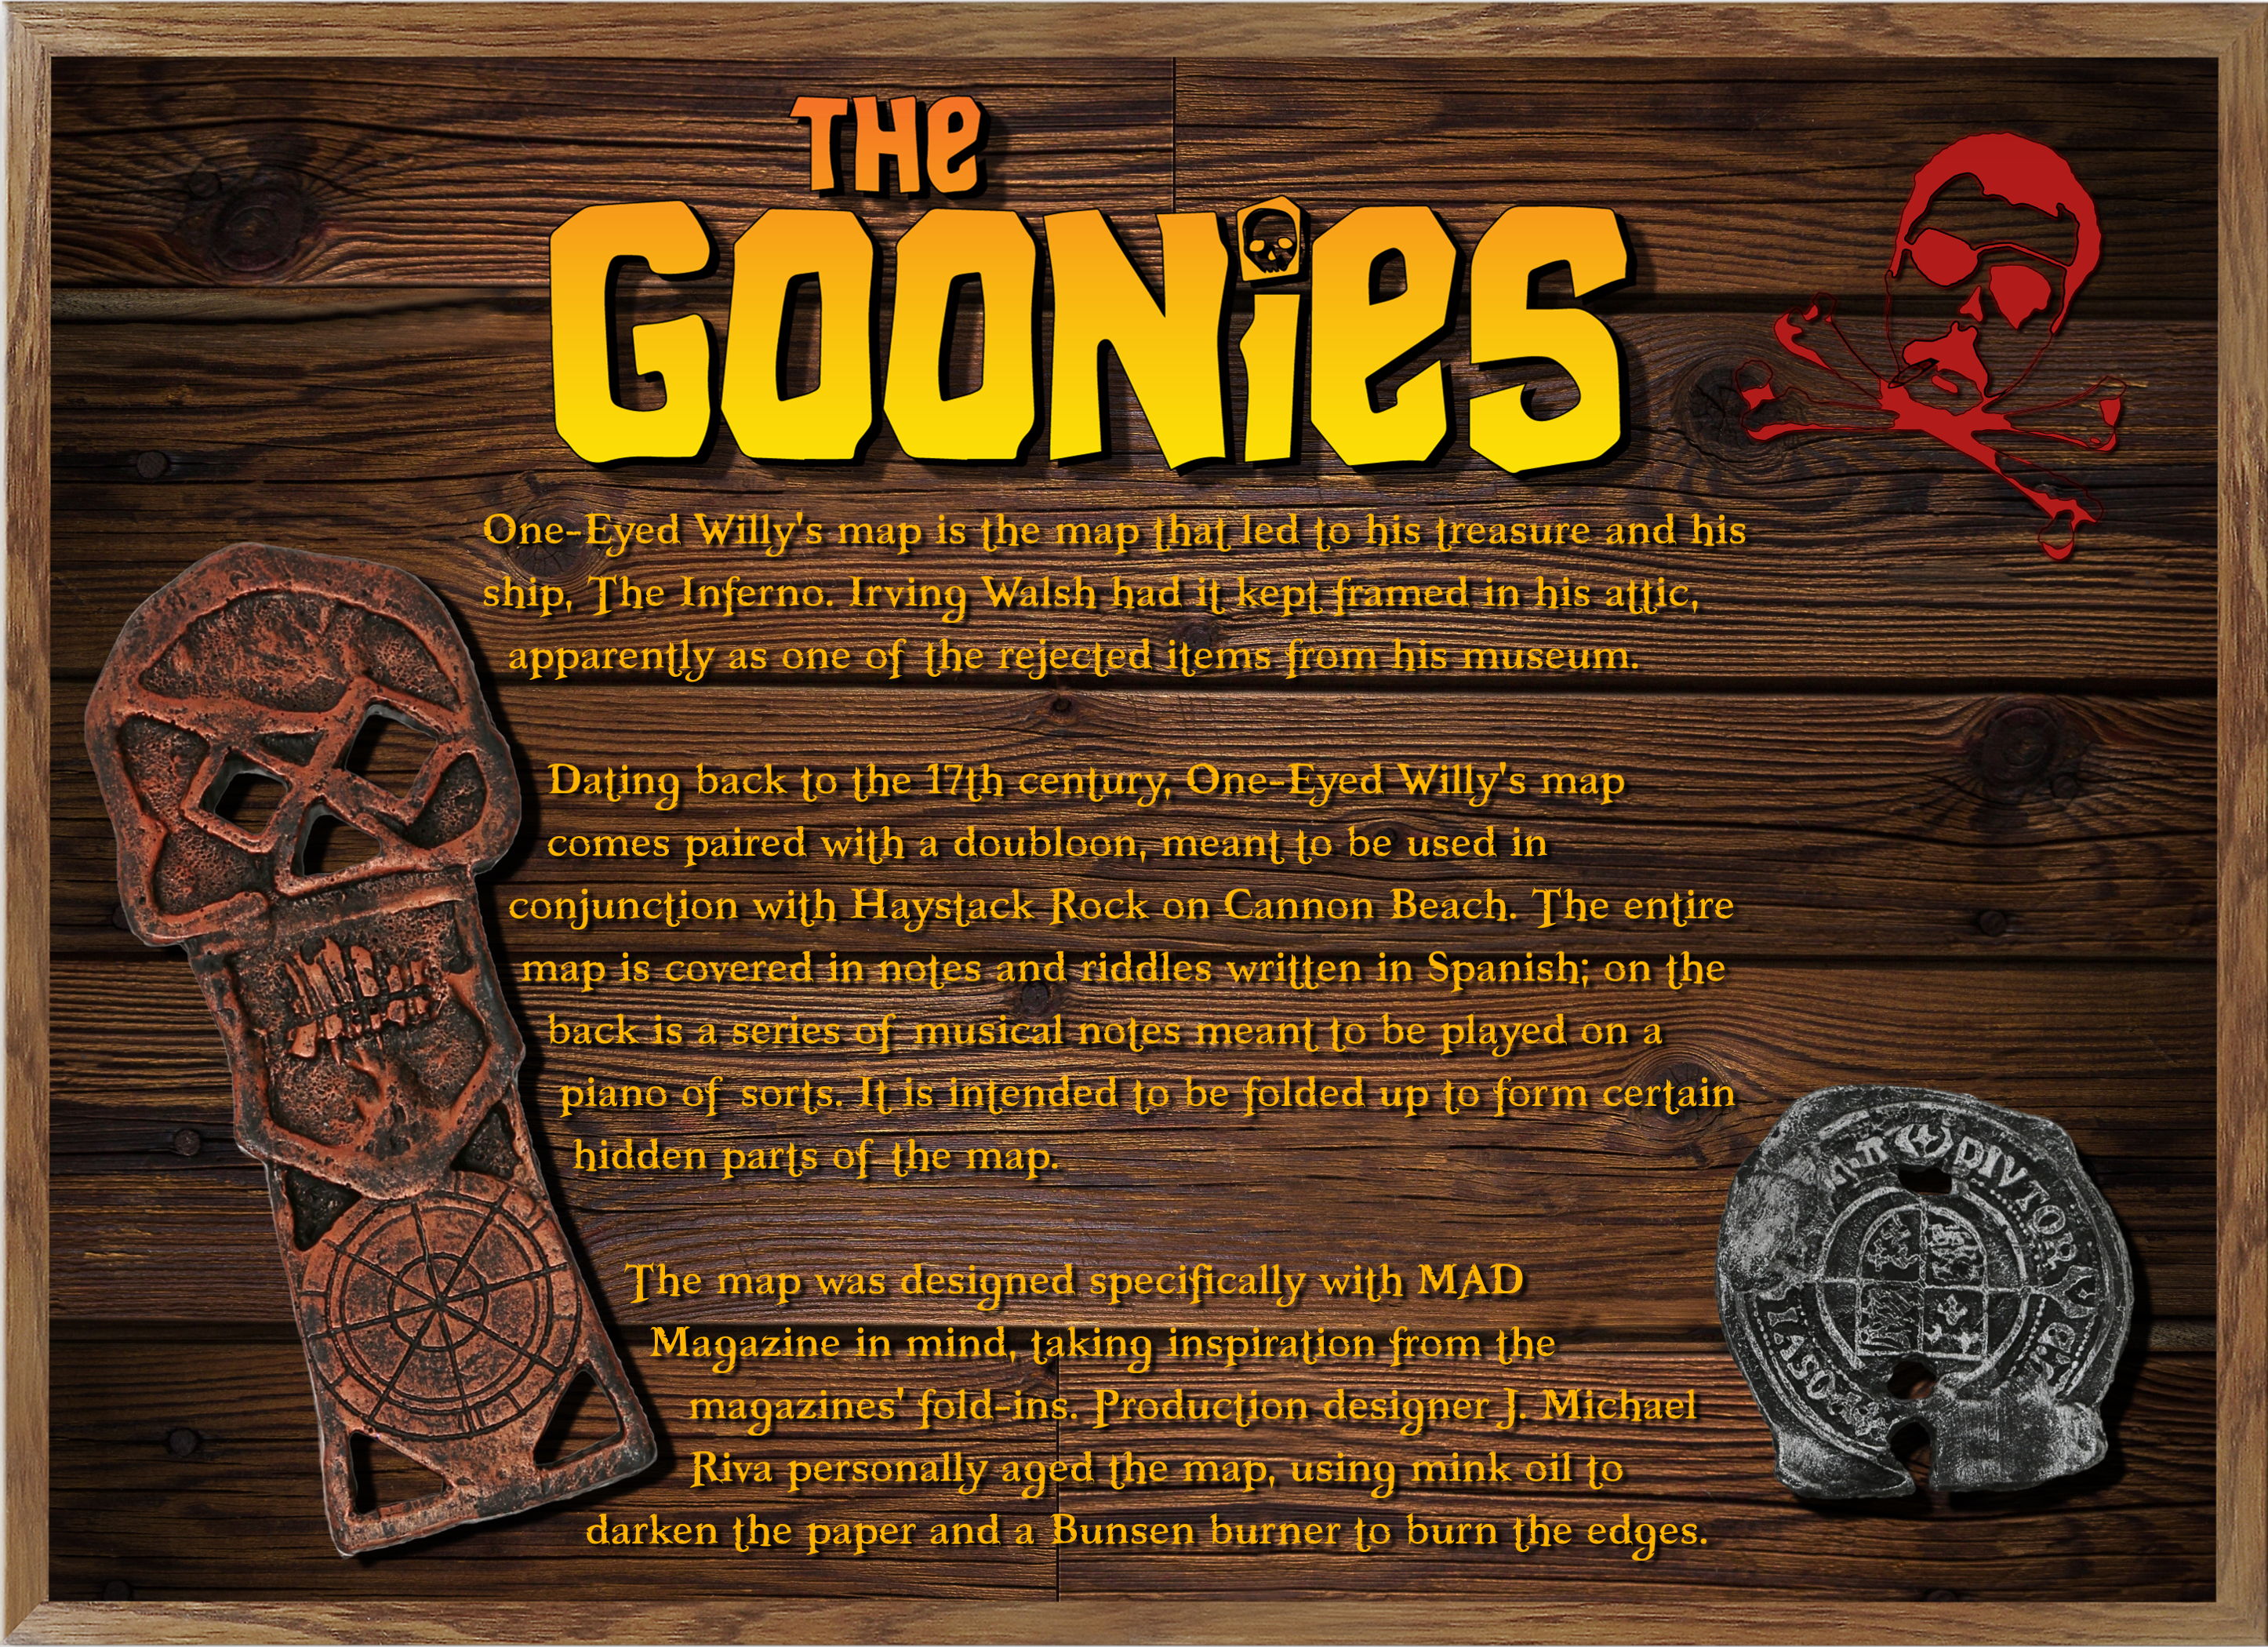 The description banner of the Goonies Treasure Map